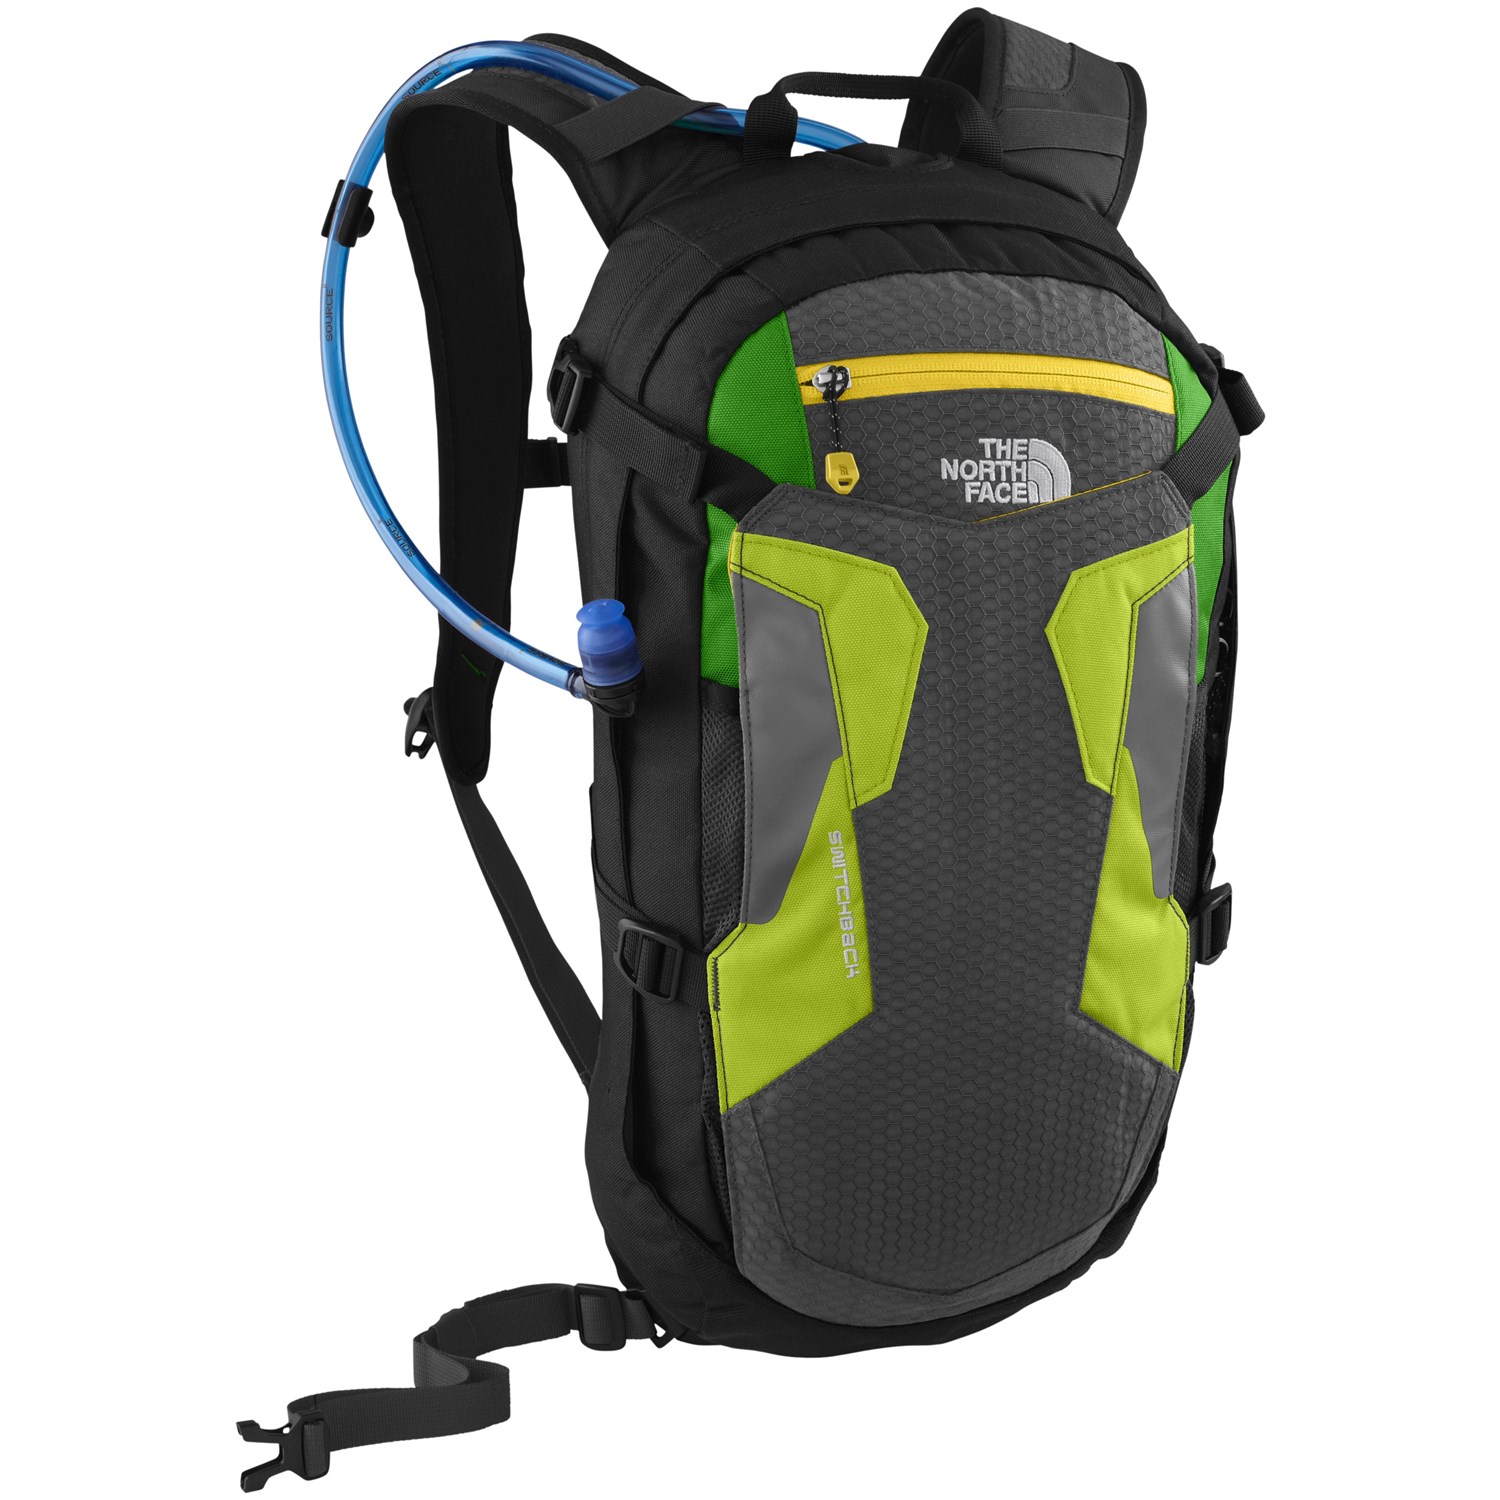 north face backpack 15l - interappacad 